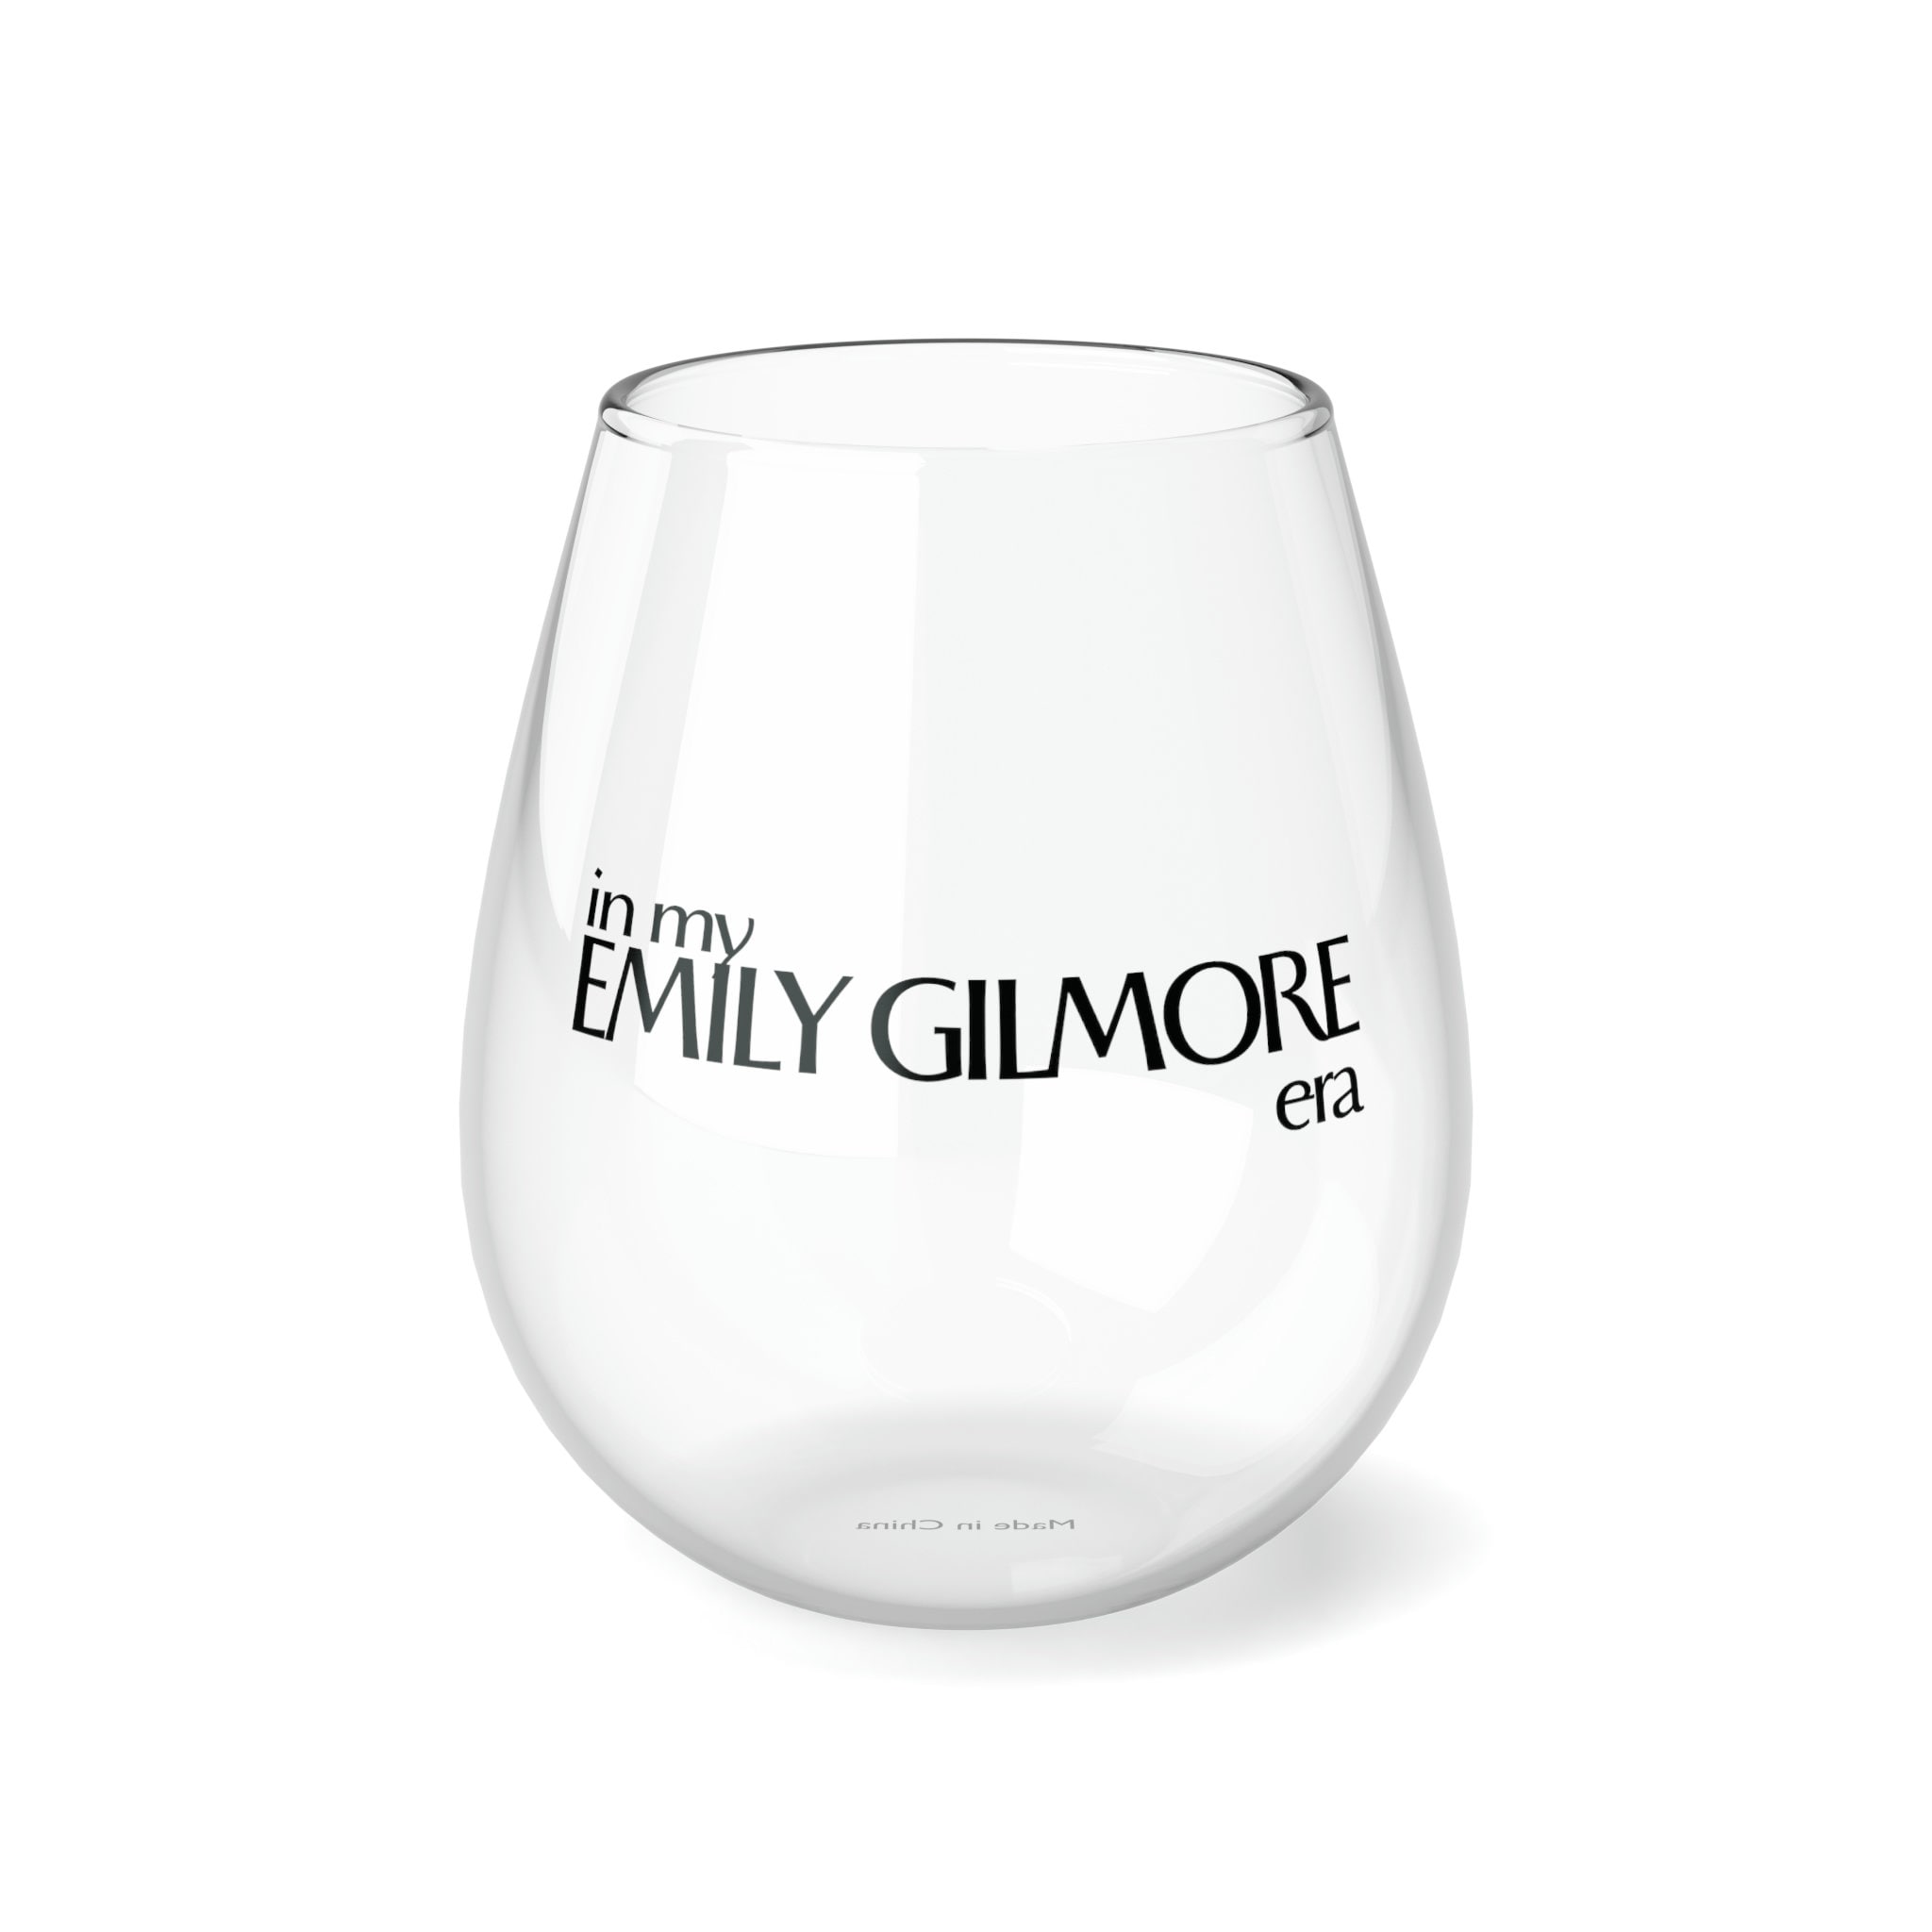  Gilmore Girls Wine Glass Set! Only prostitutes have two glasses  of wine. : Handmade Products